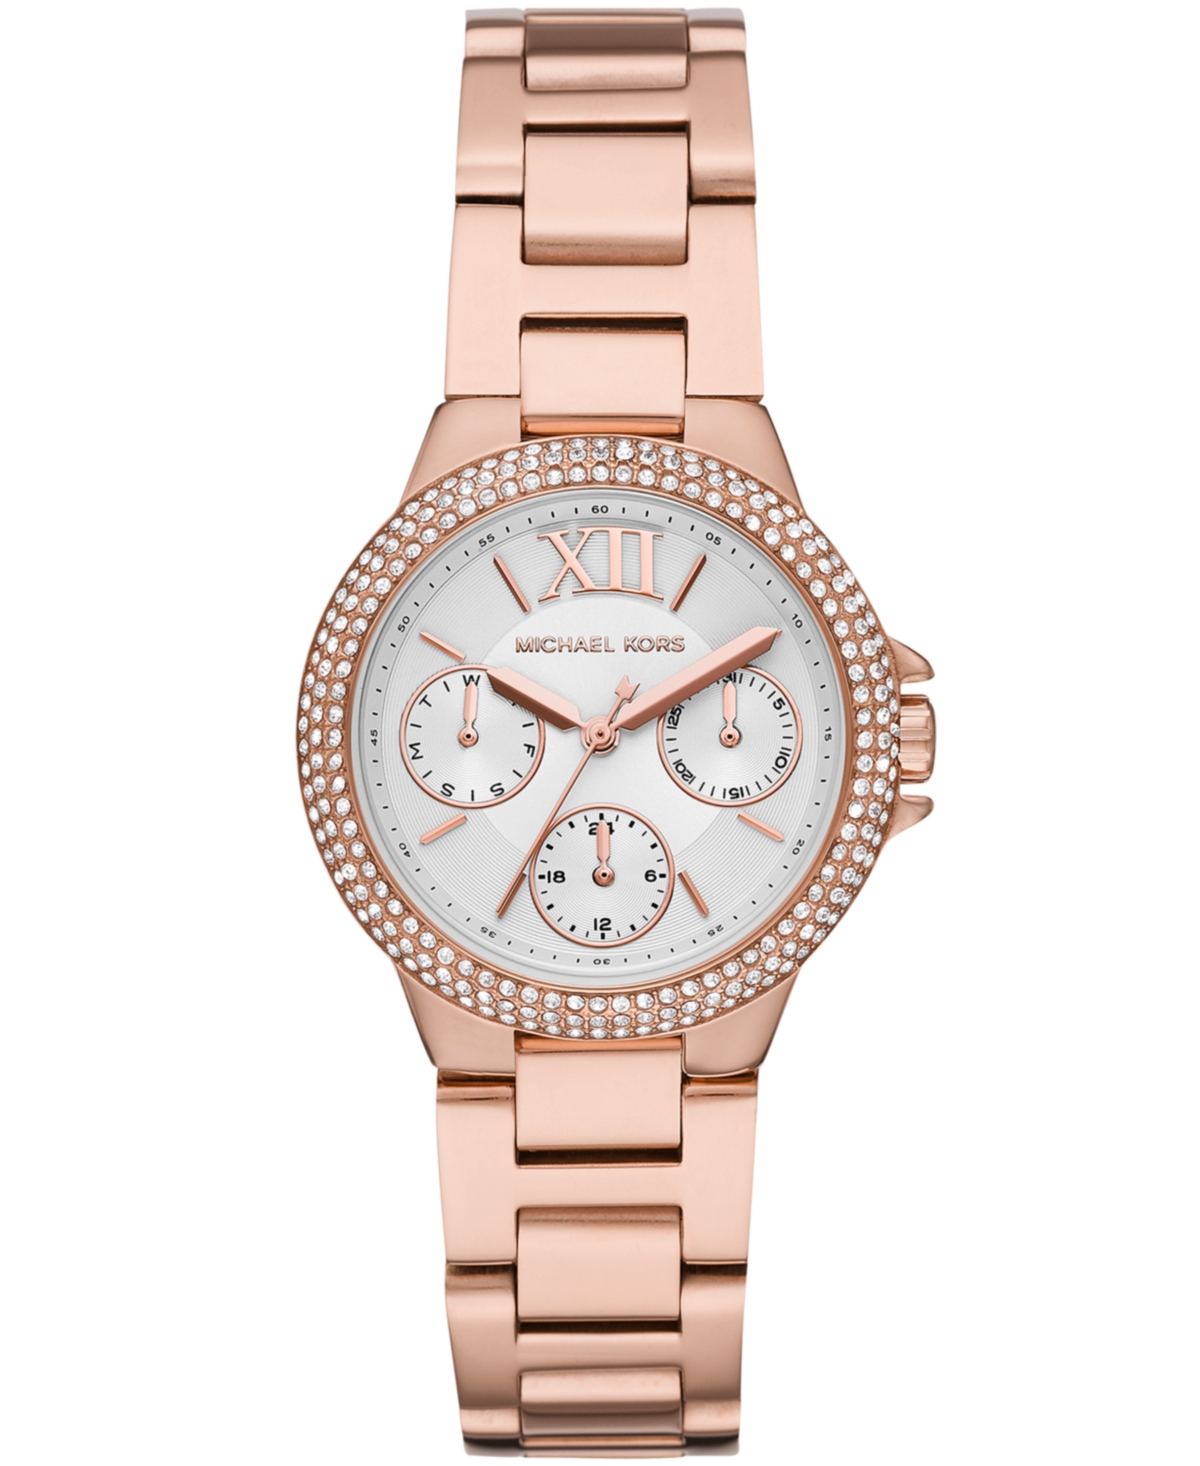 Michael Kors Women's Camille Chronograph Rose Gold-tone Stainless Steel Bracelet Watch 43mm